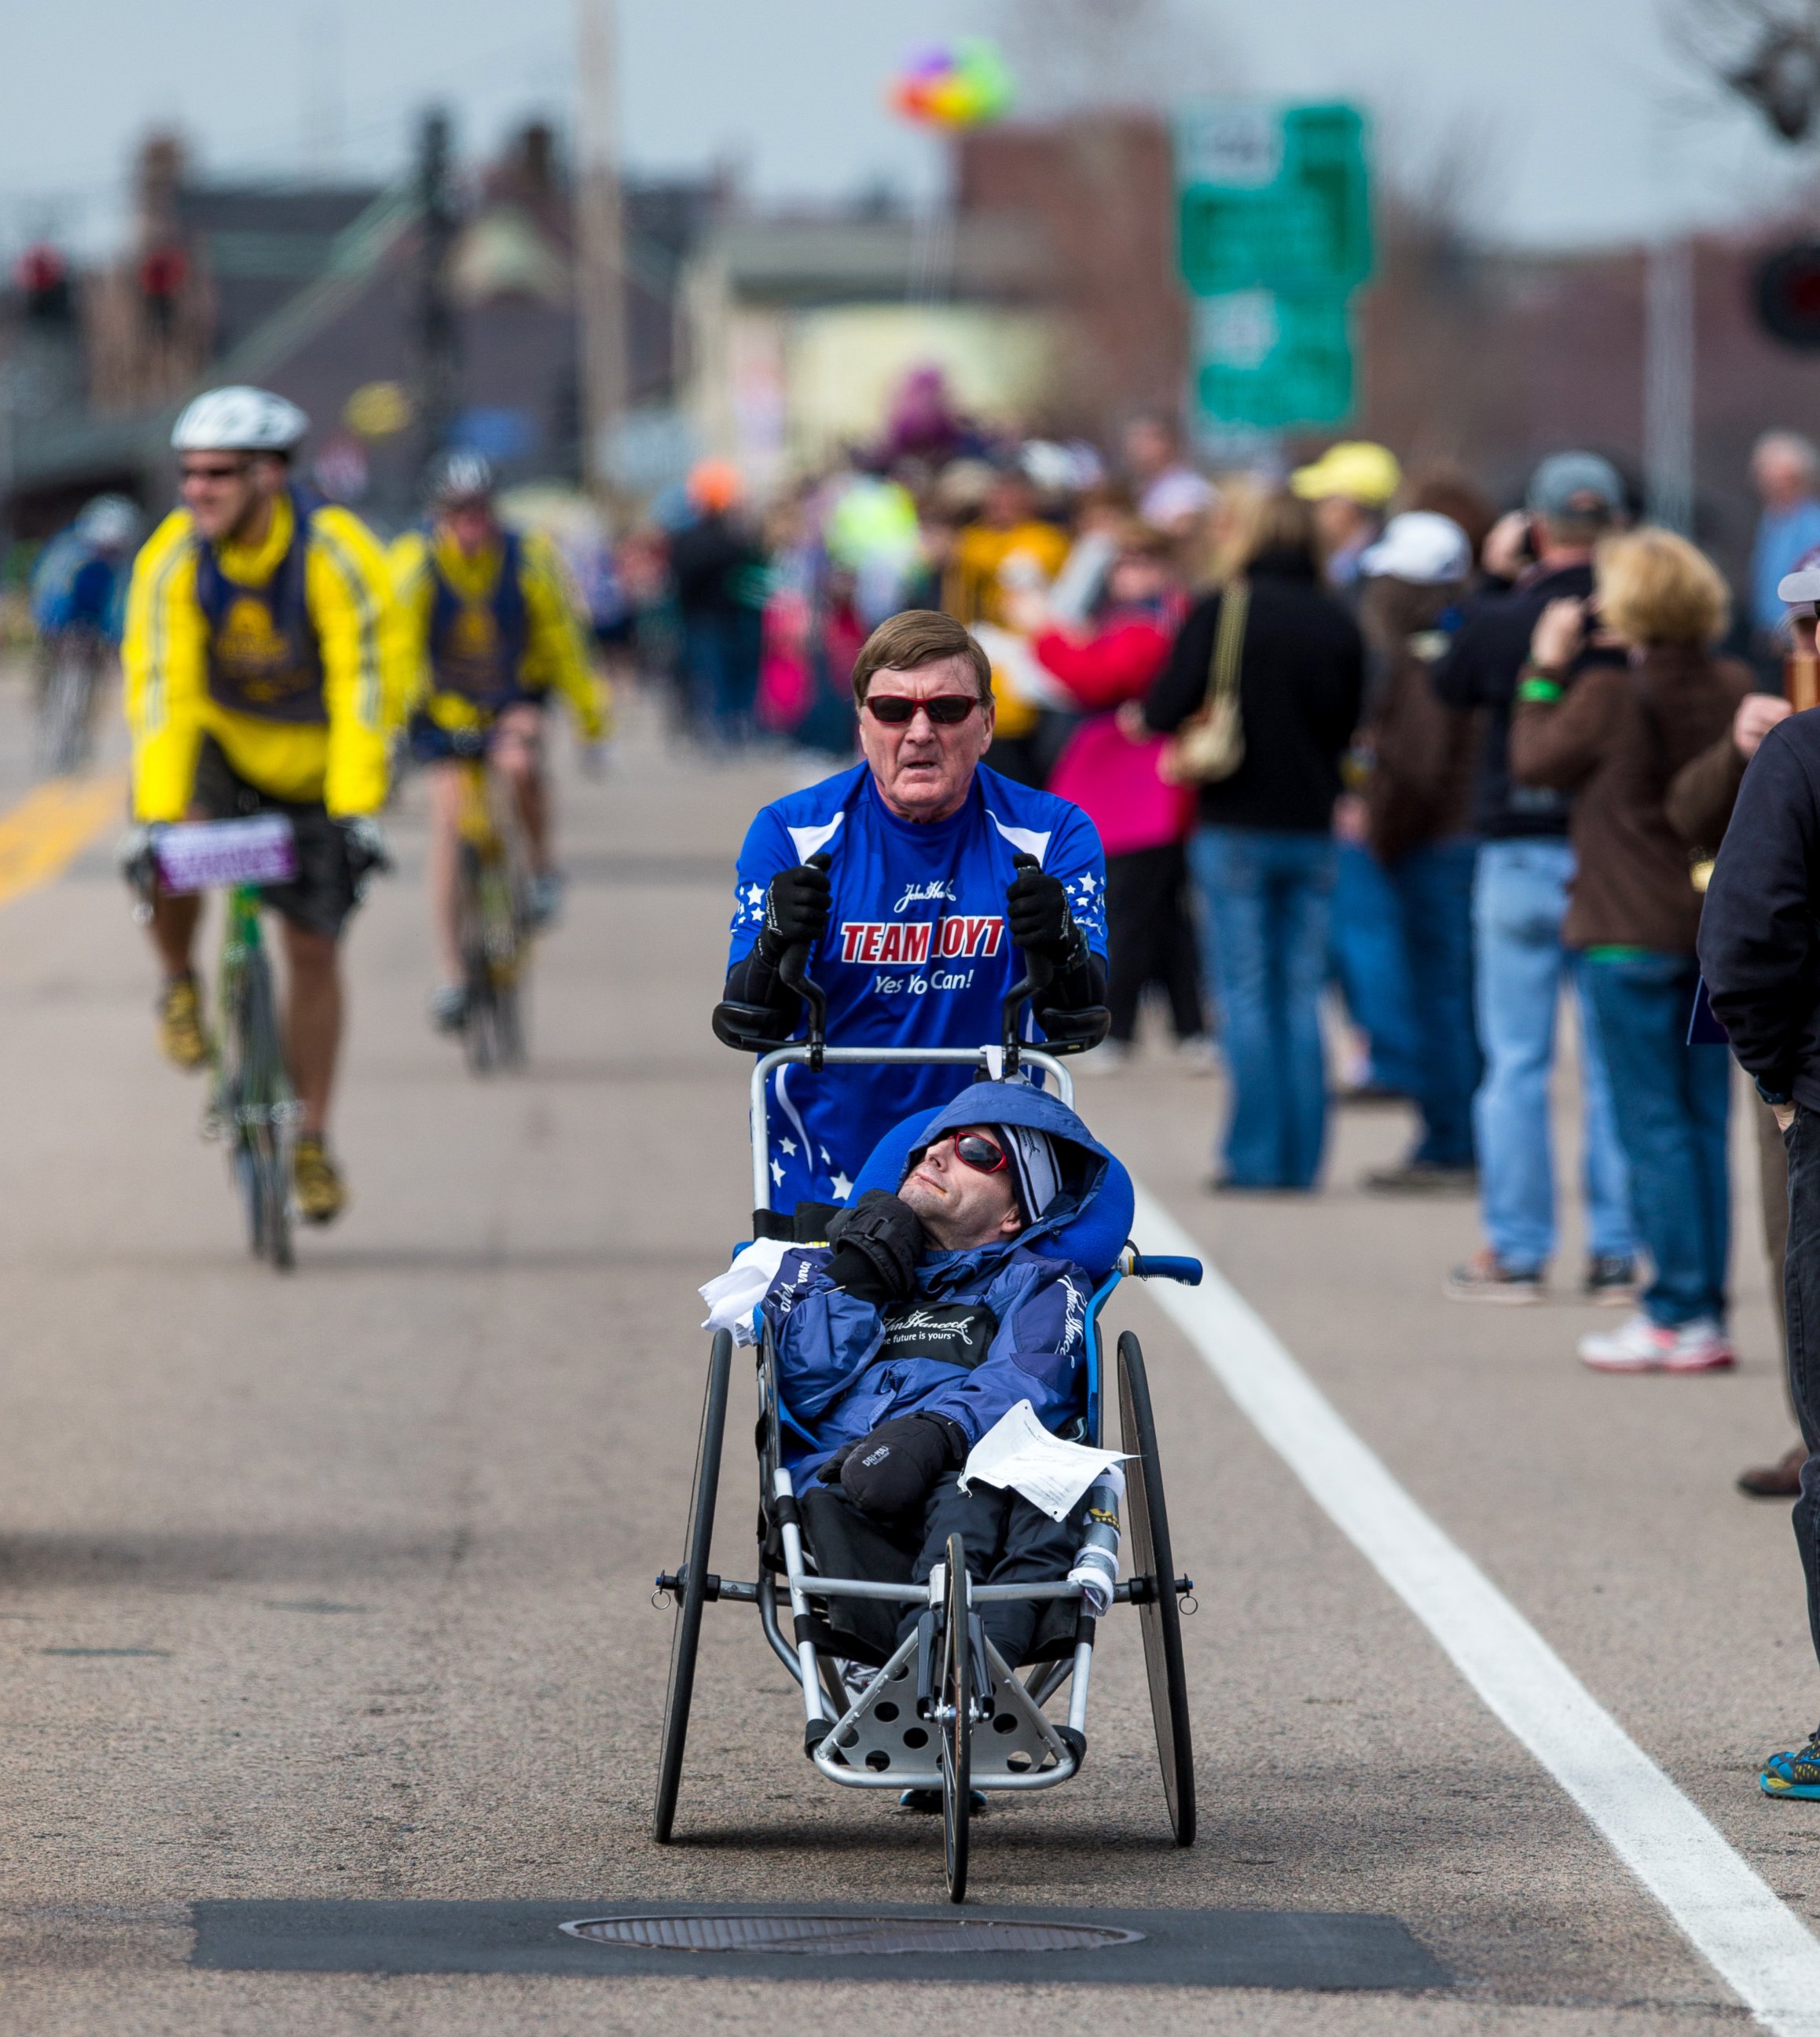 PHOTO: Dick Hoyt pushes his son, Rick Hoyt, in a specialized wheelchair during the 117th Boston Marathon on April 15, 2013.